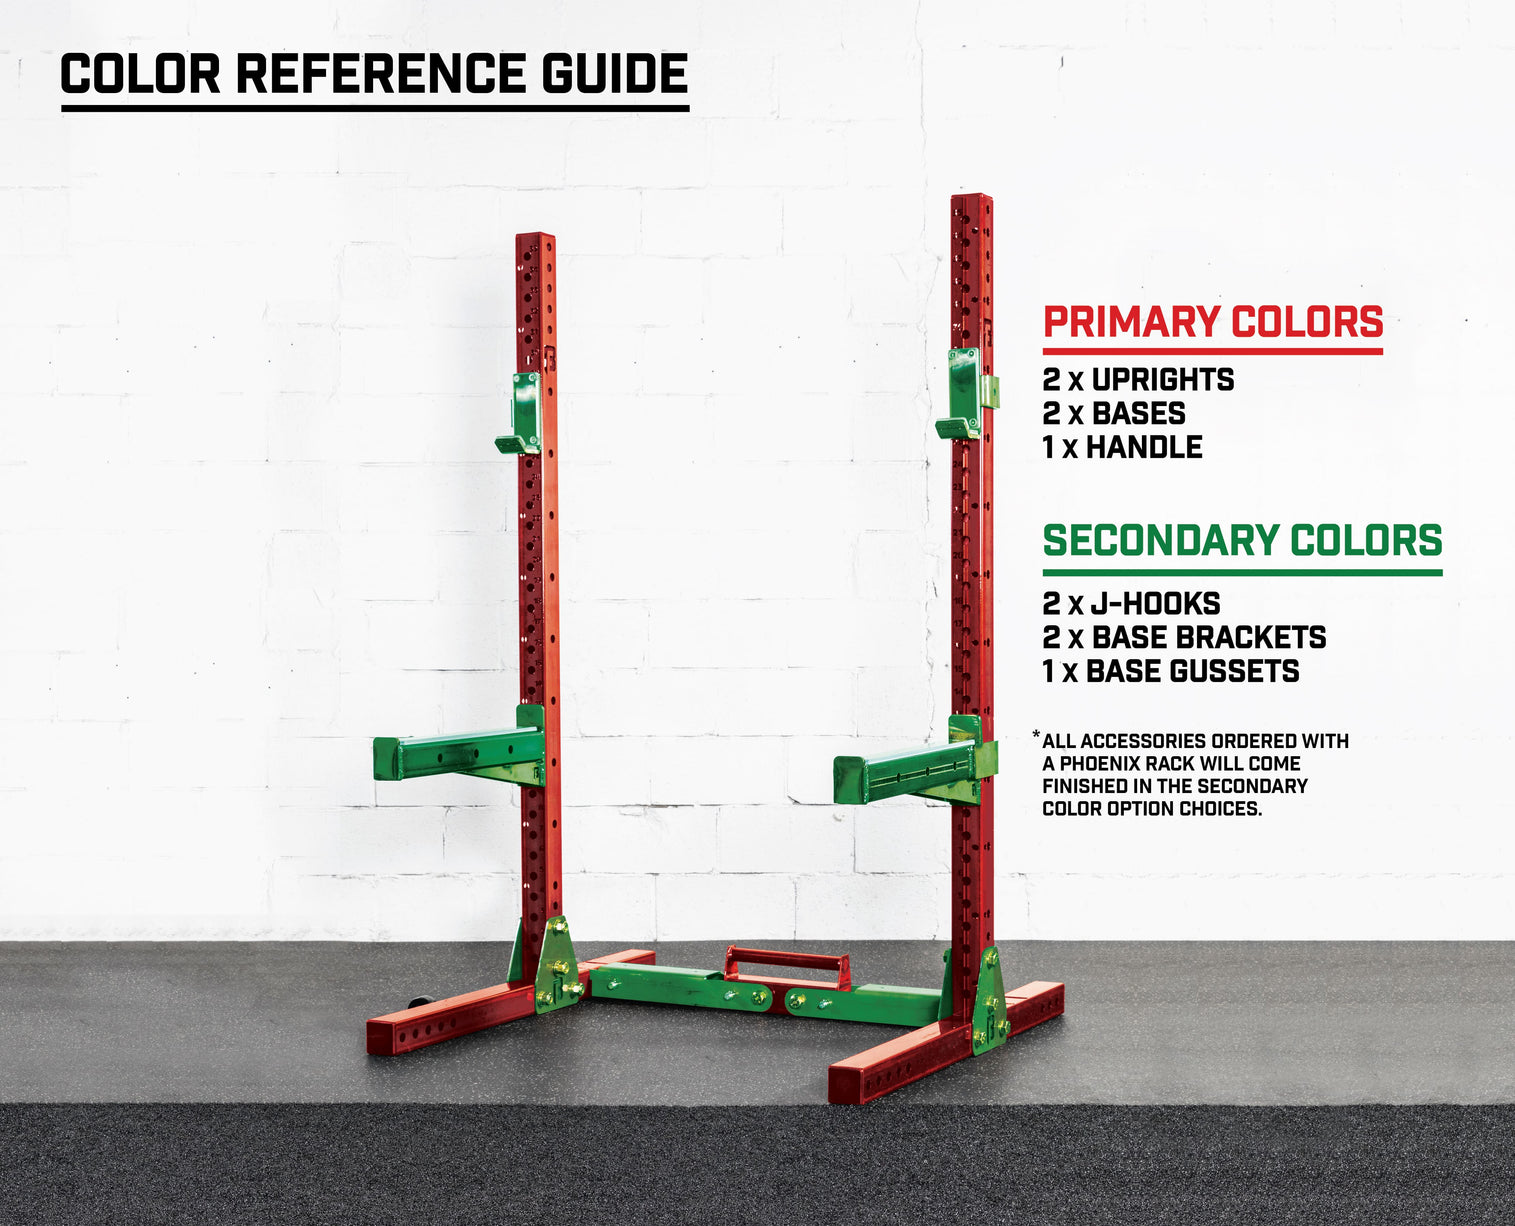 Primary colors apply to 2 uprights, 2 bases, 1 handle. Secondary colors apply to 2 j-hooks, 2 base brackets, 1 base gussets. All accessories ordered with a phoenix rack will come finished in the secondary color option choices